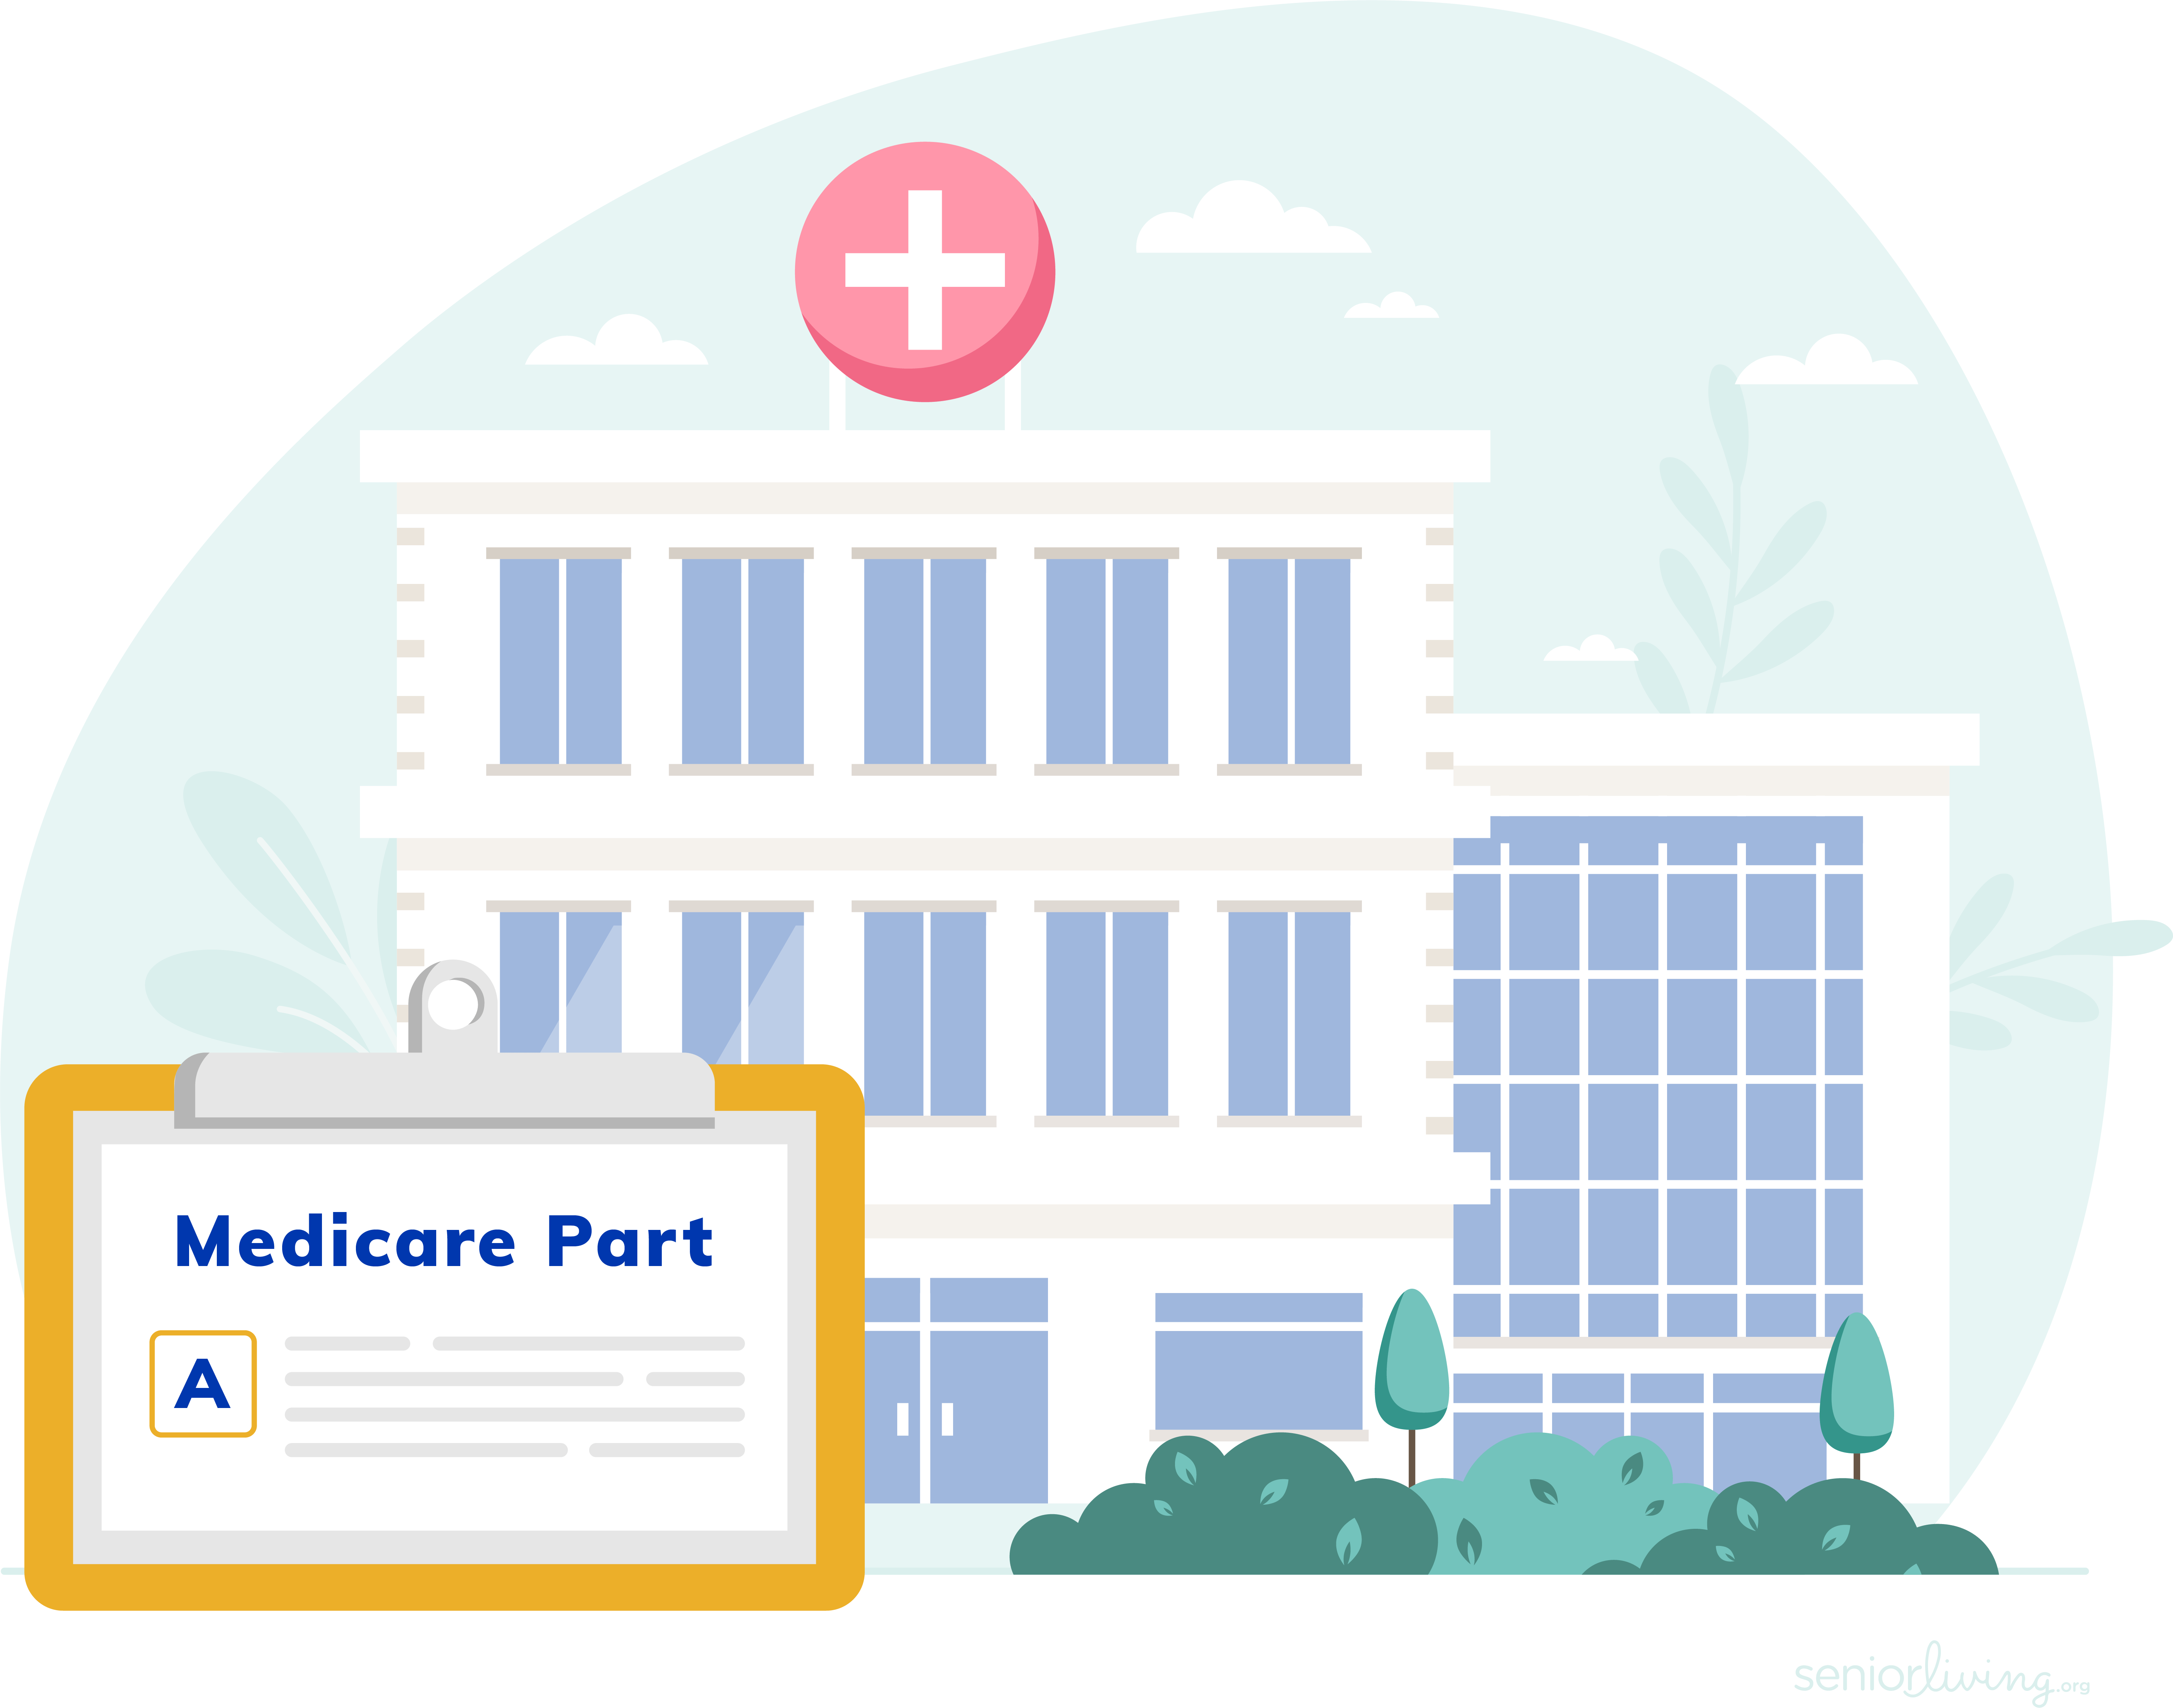 What Is Medicare Part A and What Does it Cover